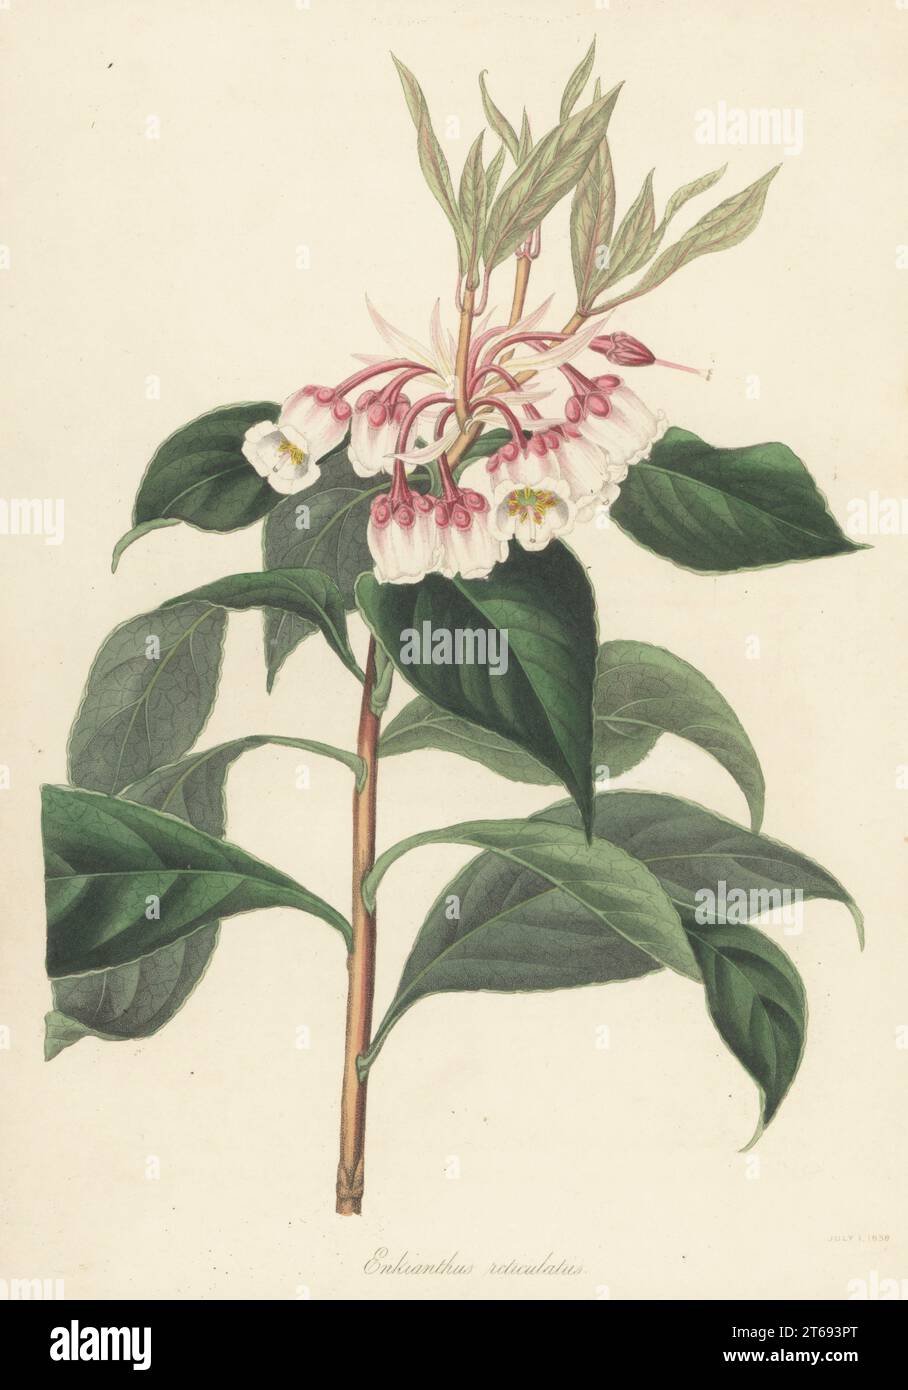 Enkianthus quinqueflorus. Native to Asia, China, and raised at Lucombe, Pince & Co. Nursery, Exeter. Netted-leaved enkianthus, Enkianthus reticulatus. Handcoloured lithograph after a botanical illustration by Miss Flood from Joseph Paxtons Magazine of Botany, and Register of Flowering Plants, Volume 5, Orr and Smith, London, 1838. Stock Photo